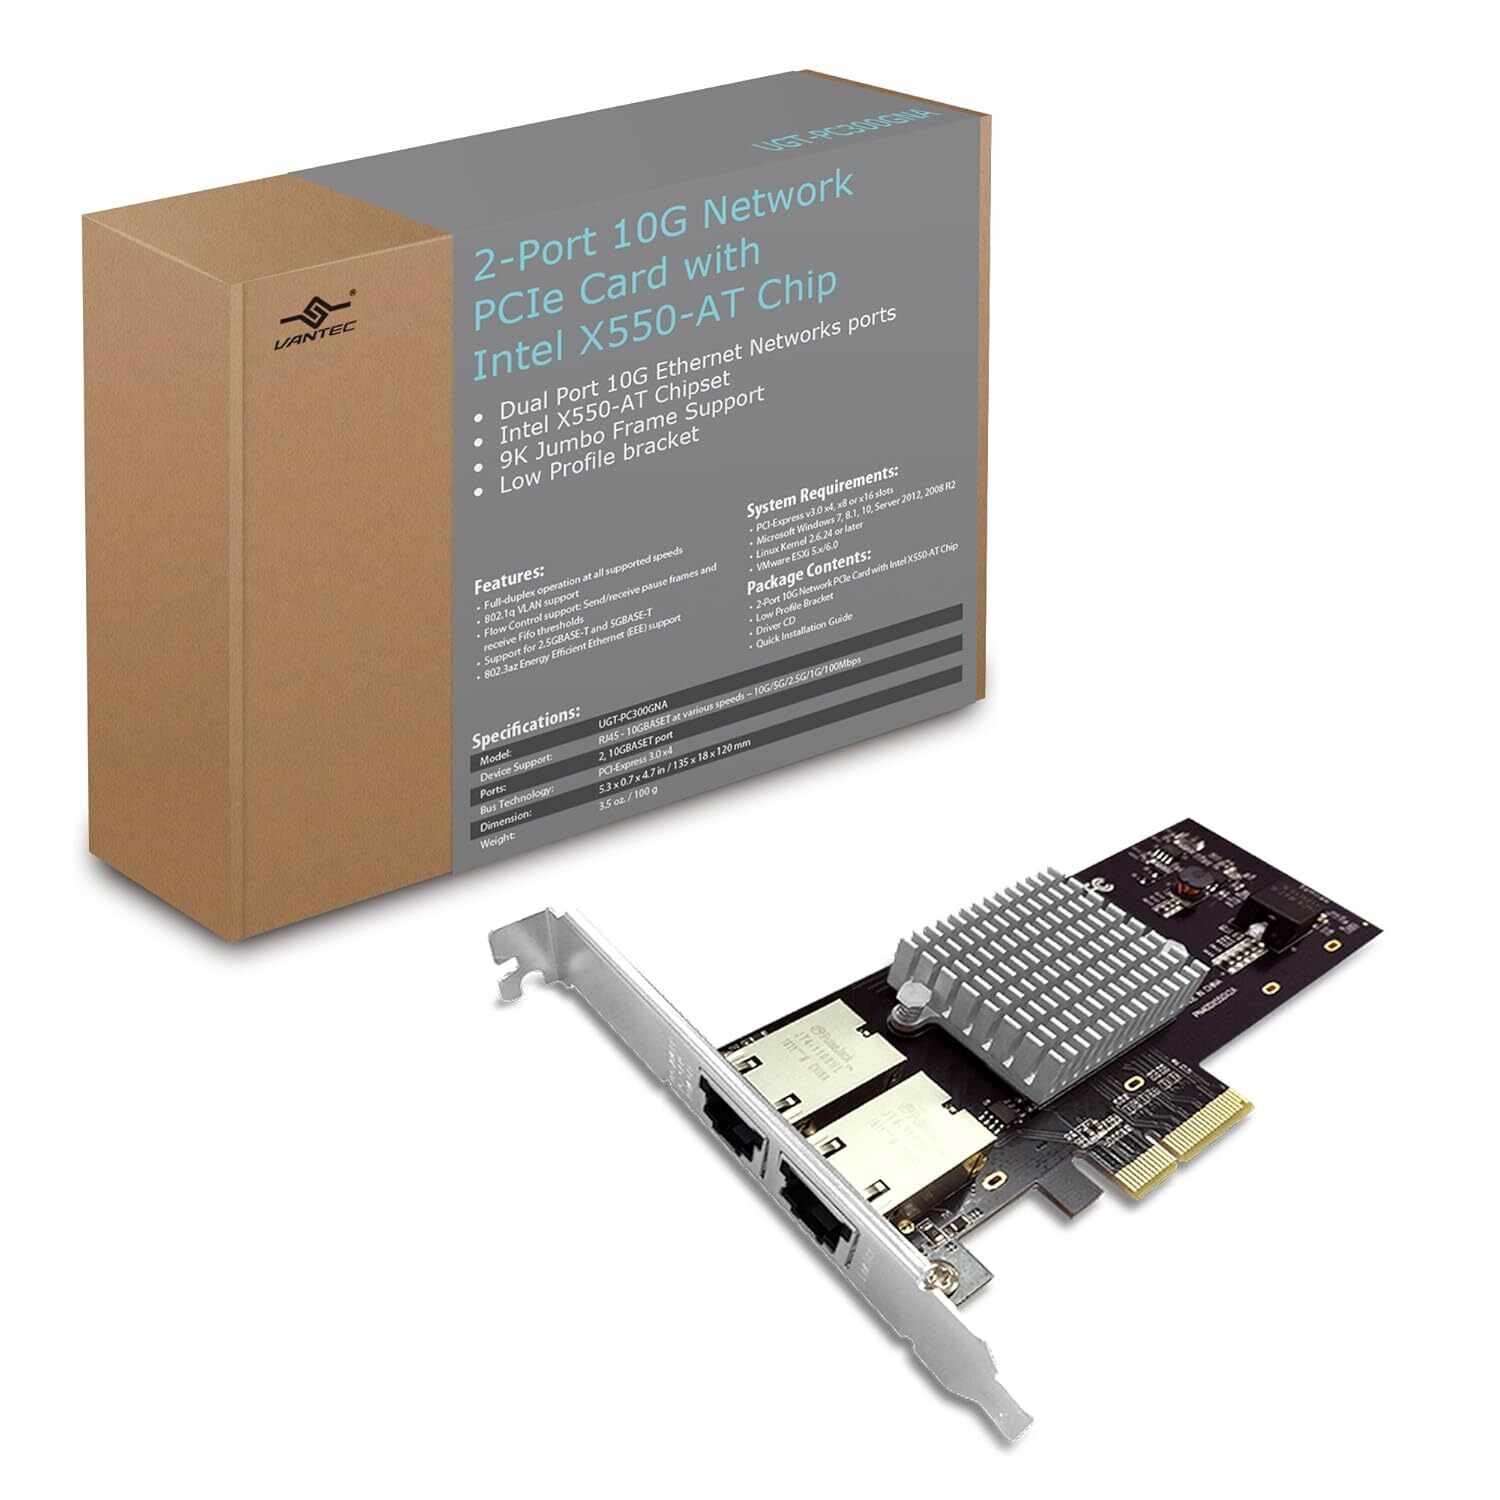 Vantec 2-Port 10G Network PCIe Card with Intel X550-AT Chip with Low Profile B